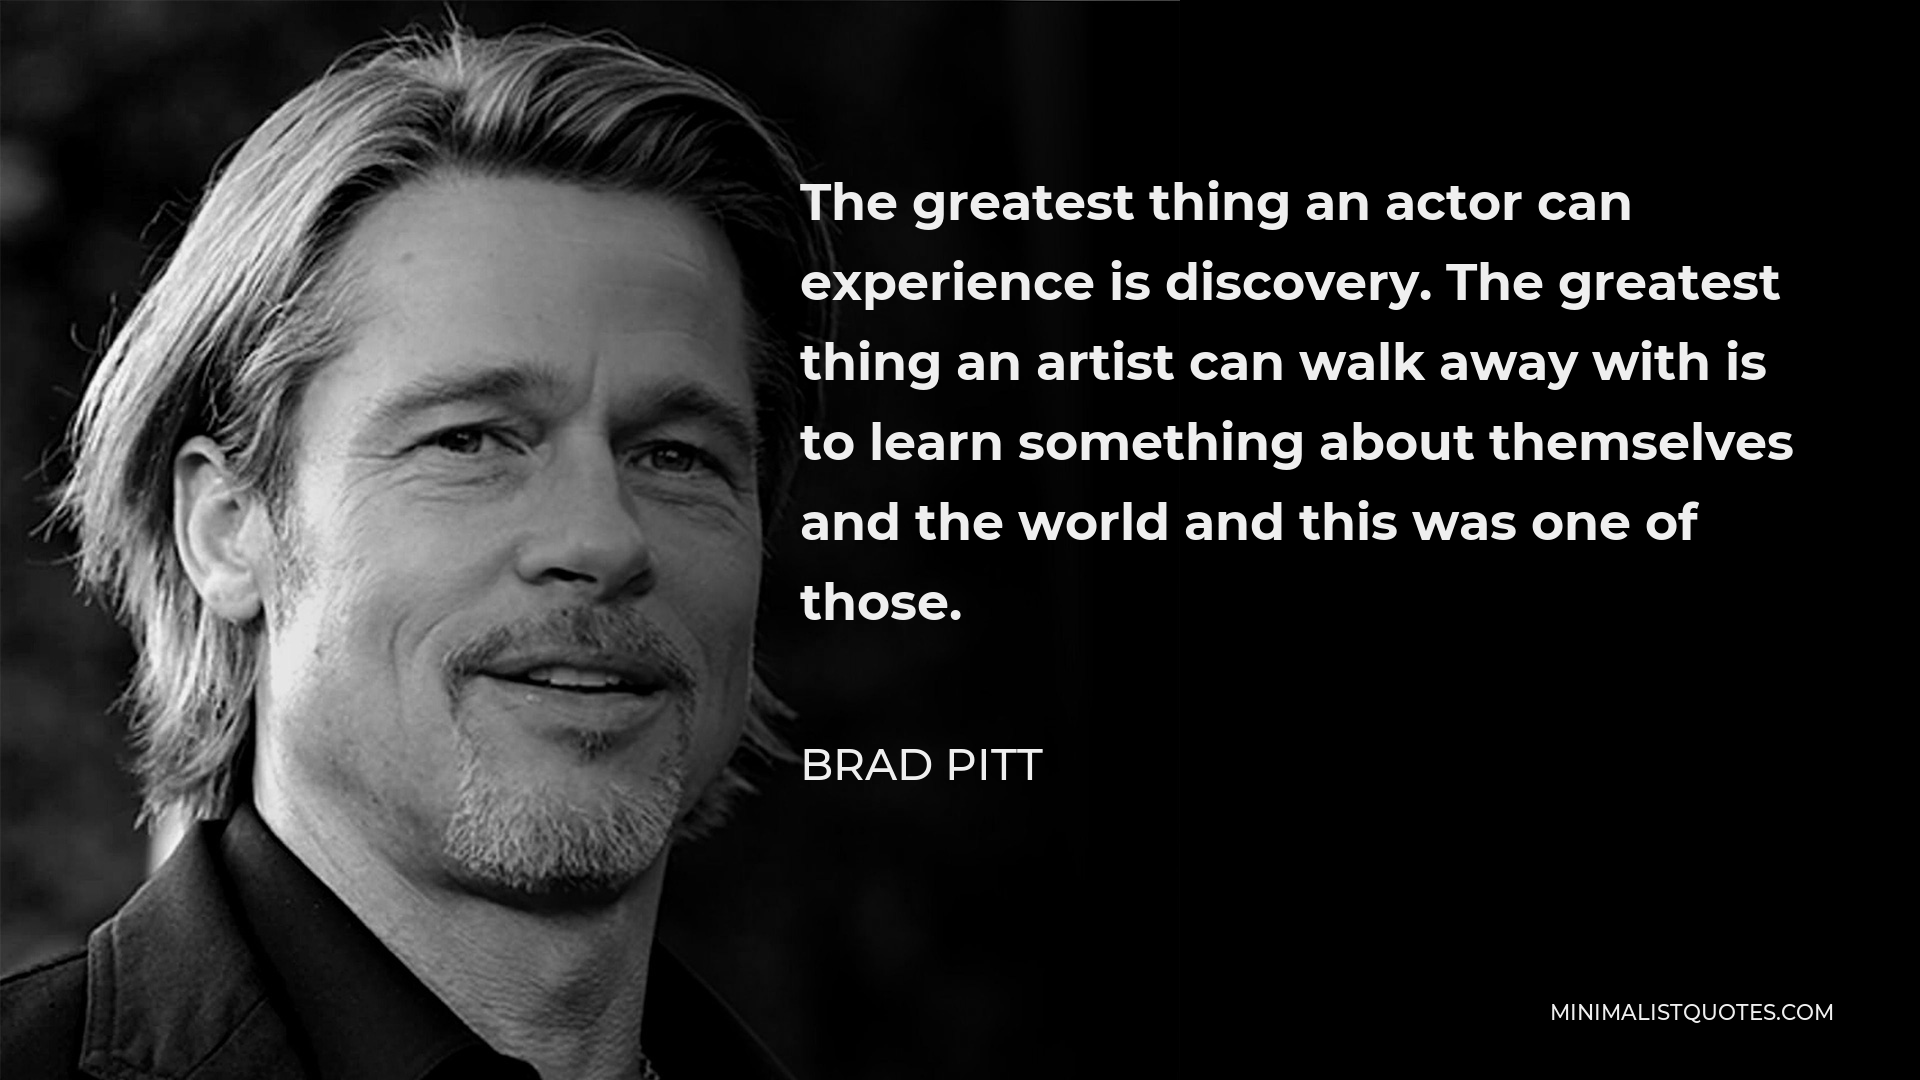 Brad Pitt Quote - The greatest thing an actor can experience is discovery. The greatest thing an artist can walk away with is to learn something about themselves and the world and this was one of those.